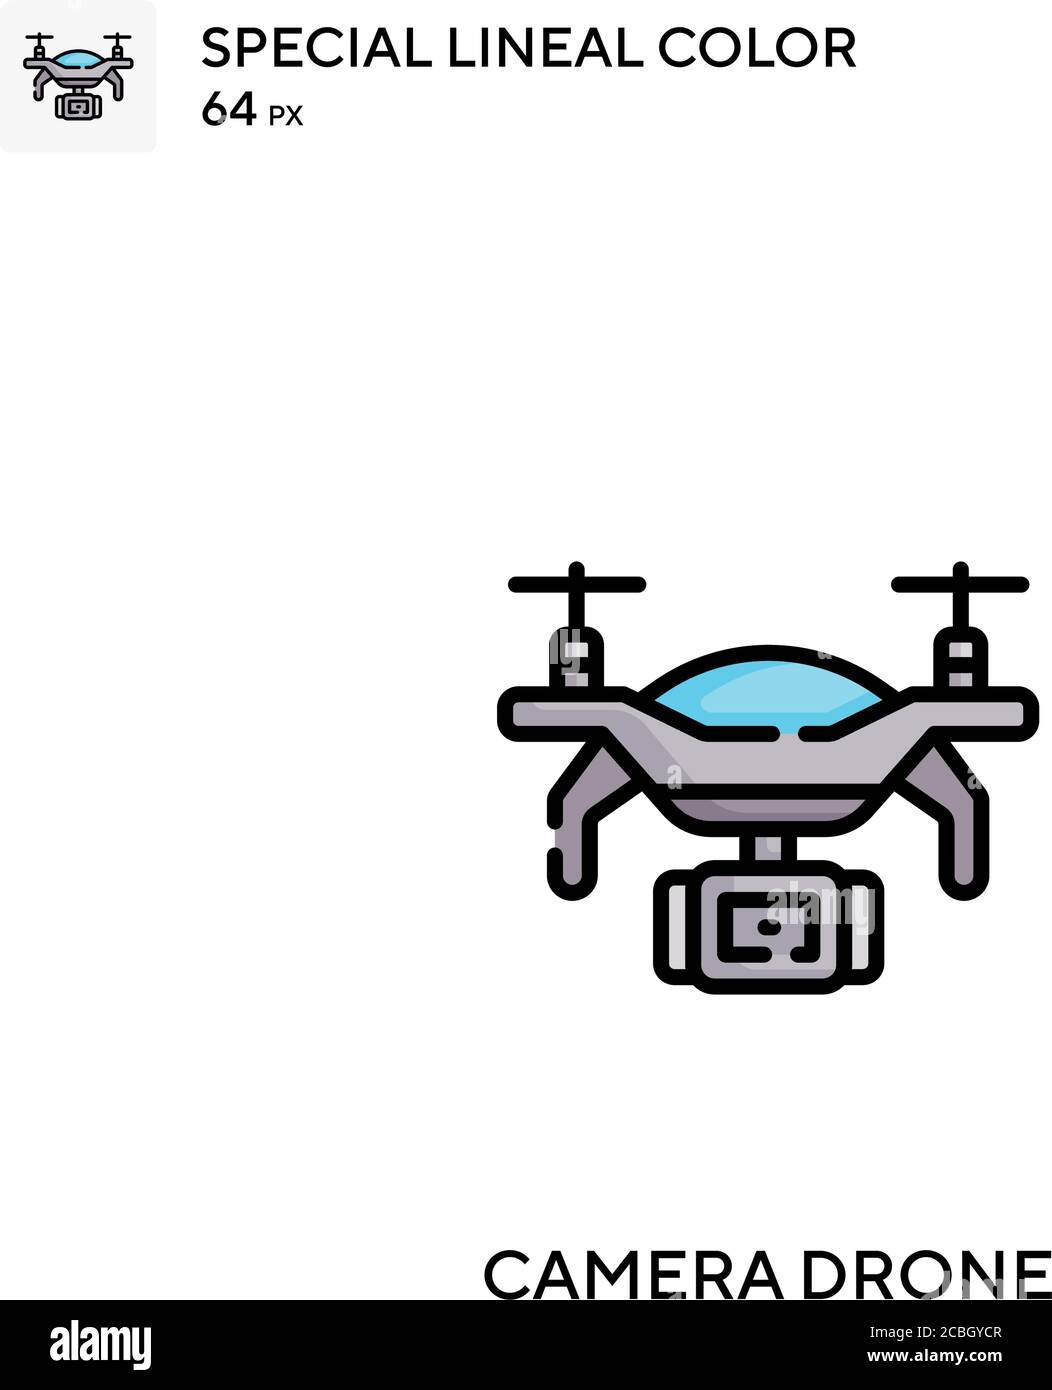 Camera drone special lineal color vector icon. Camera drone icons for your business project Stock Vector